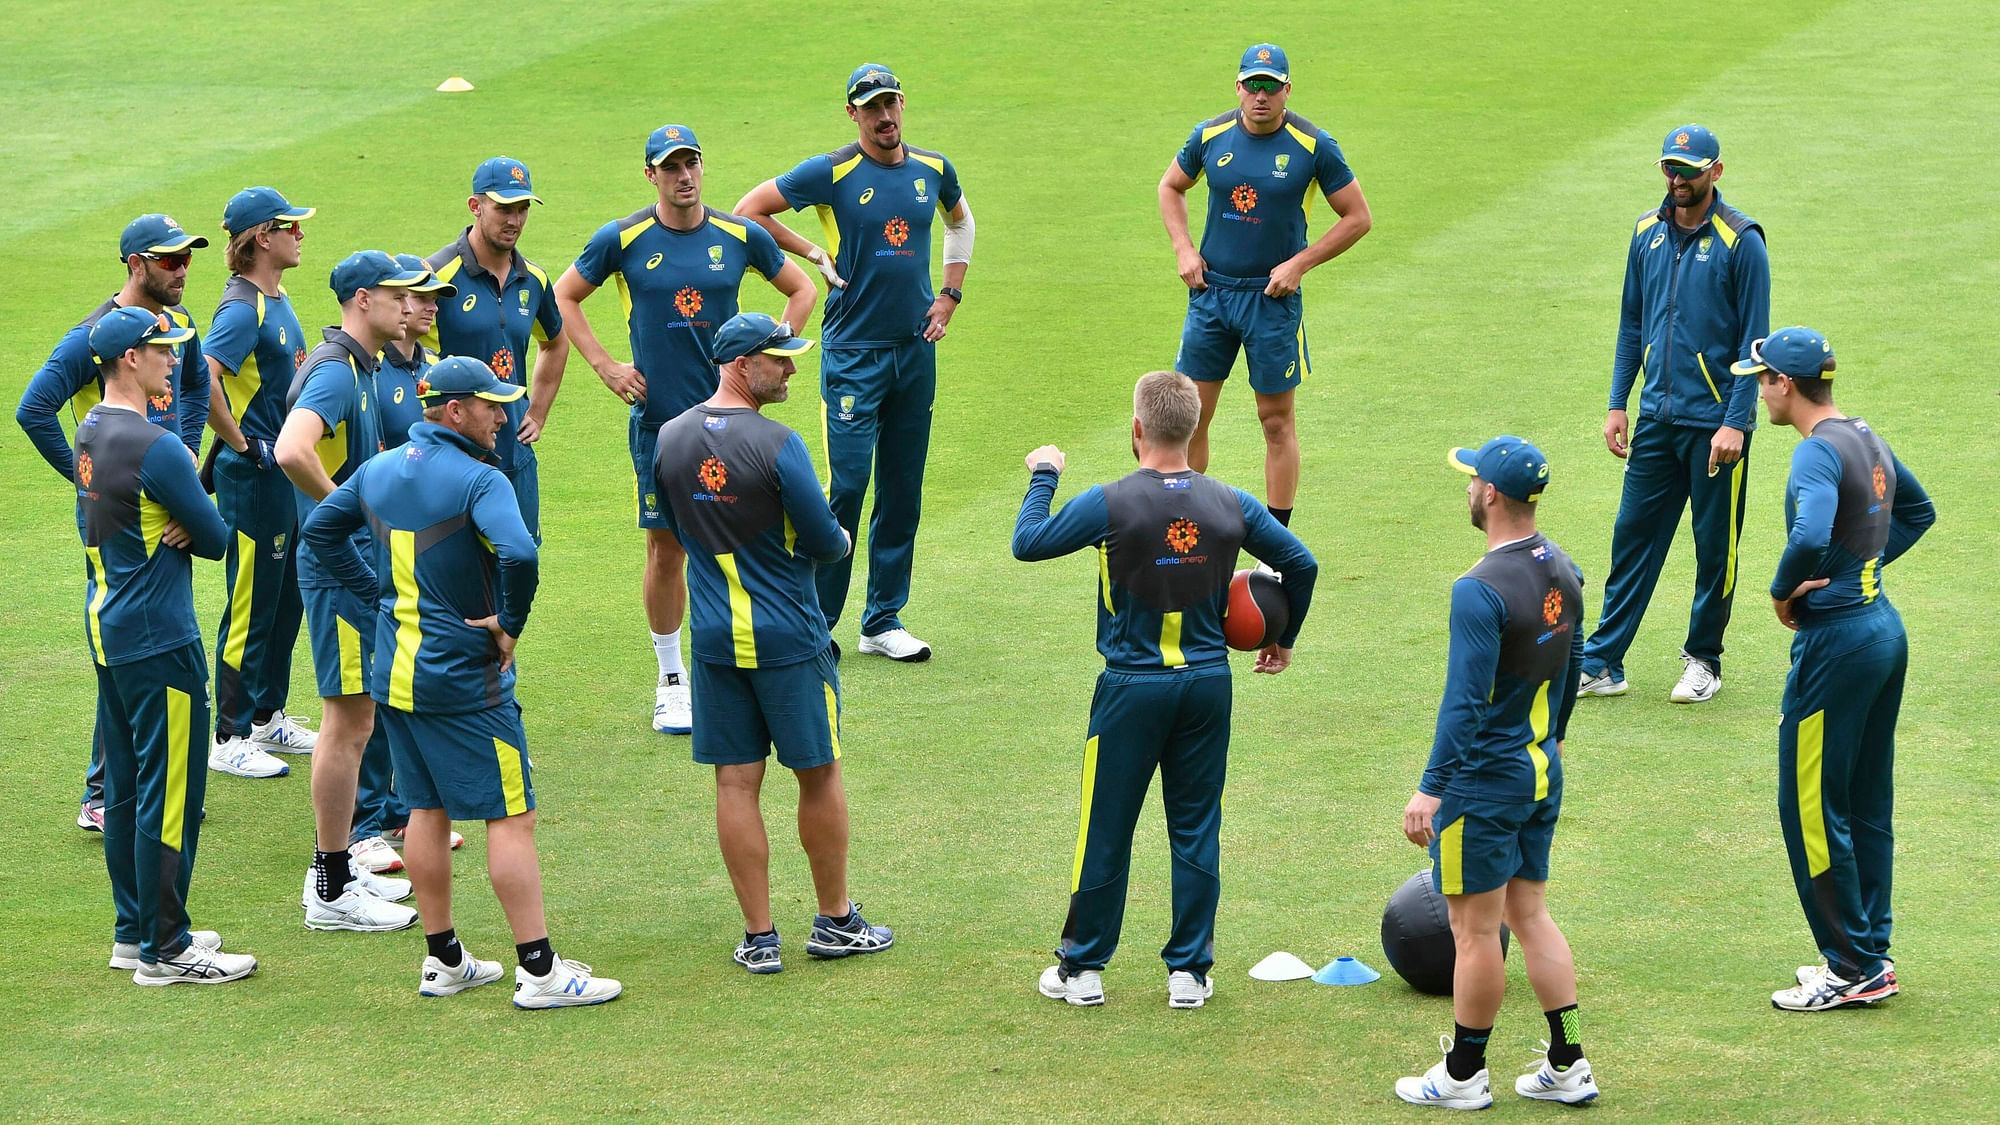 Australian team in a practice session ahead of its semifinal match against England